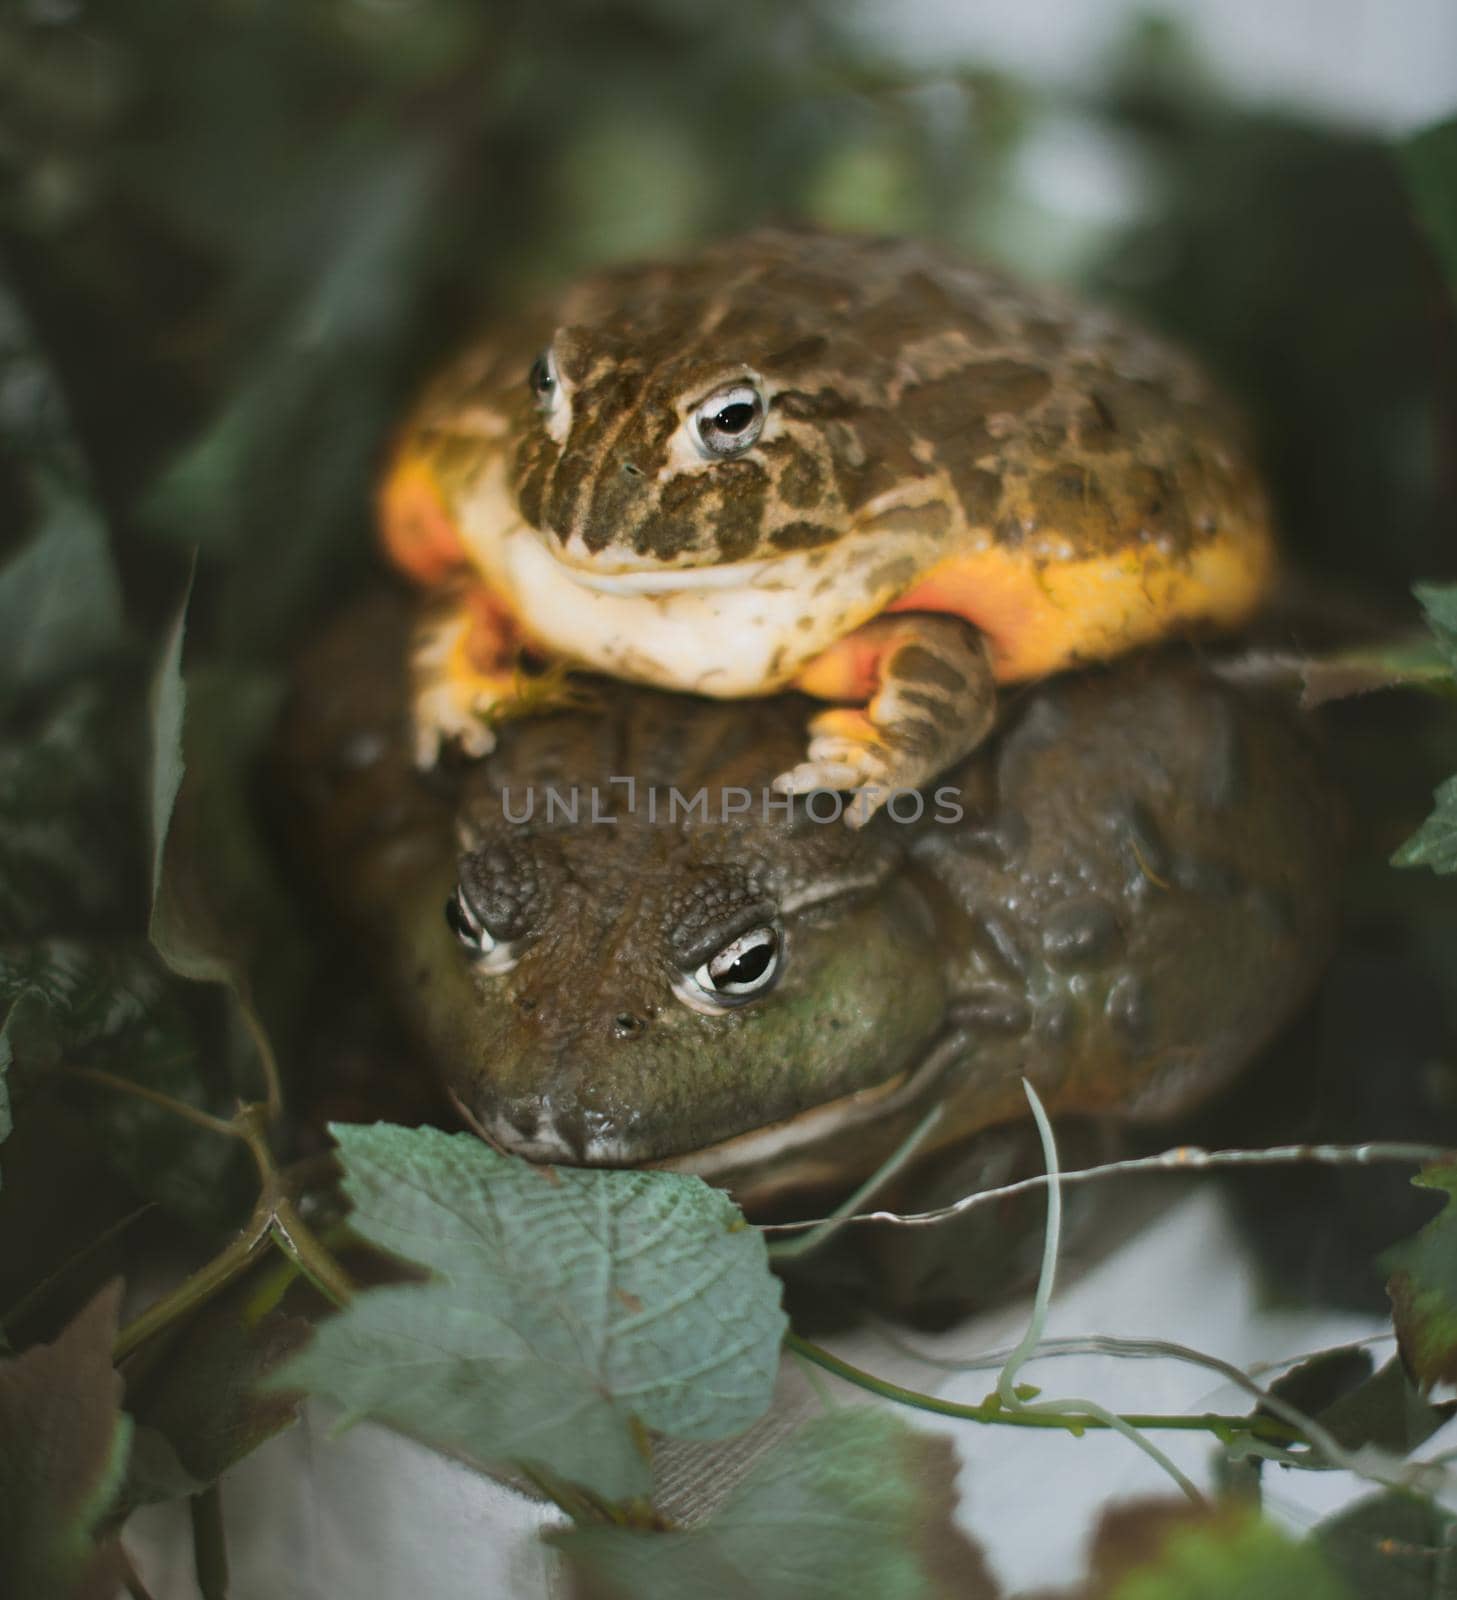 Couple African bullfrogs, male and female, Pyxicephalus adspersus, sitting on green leaves